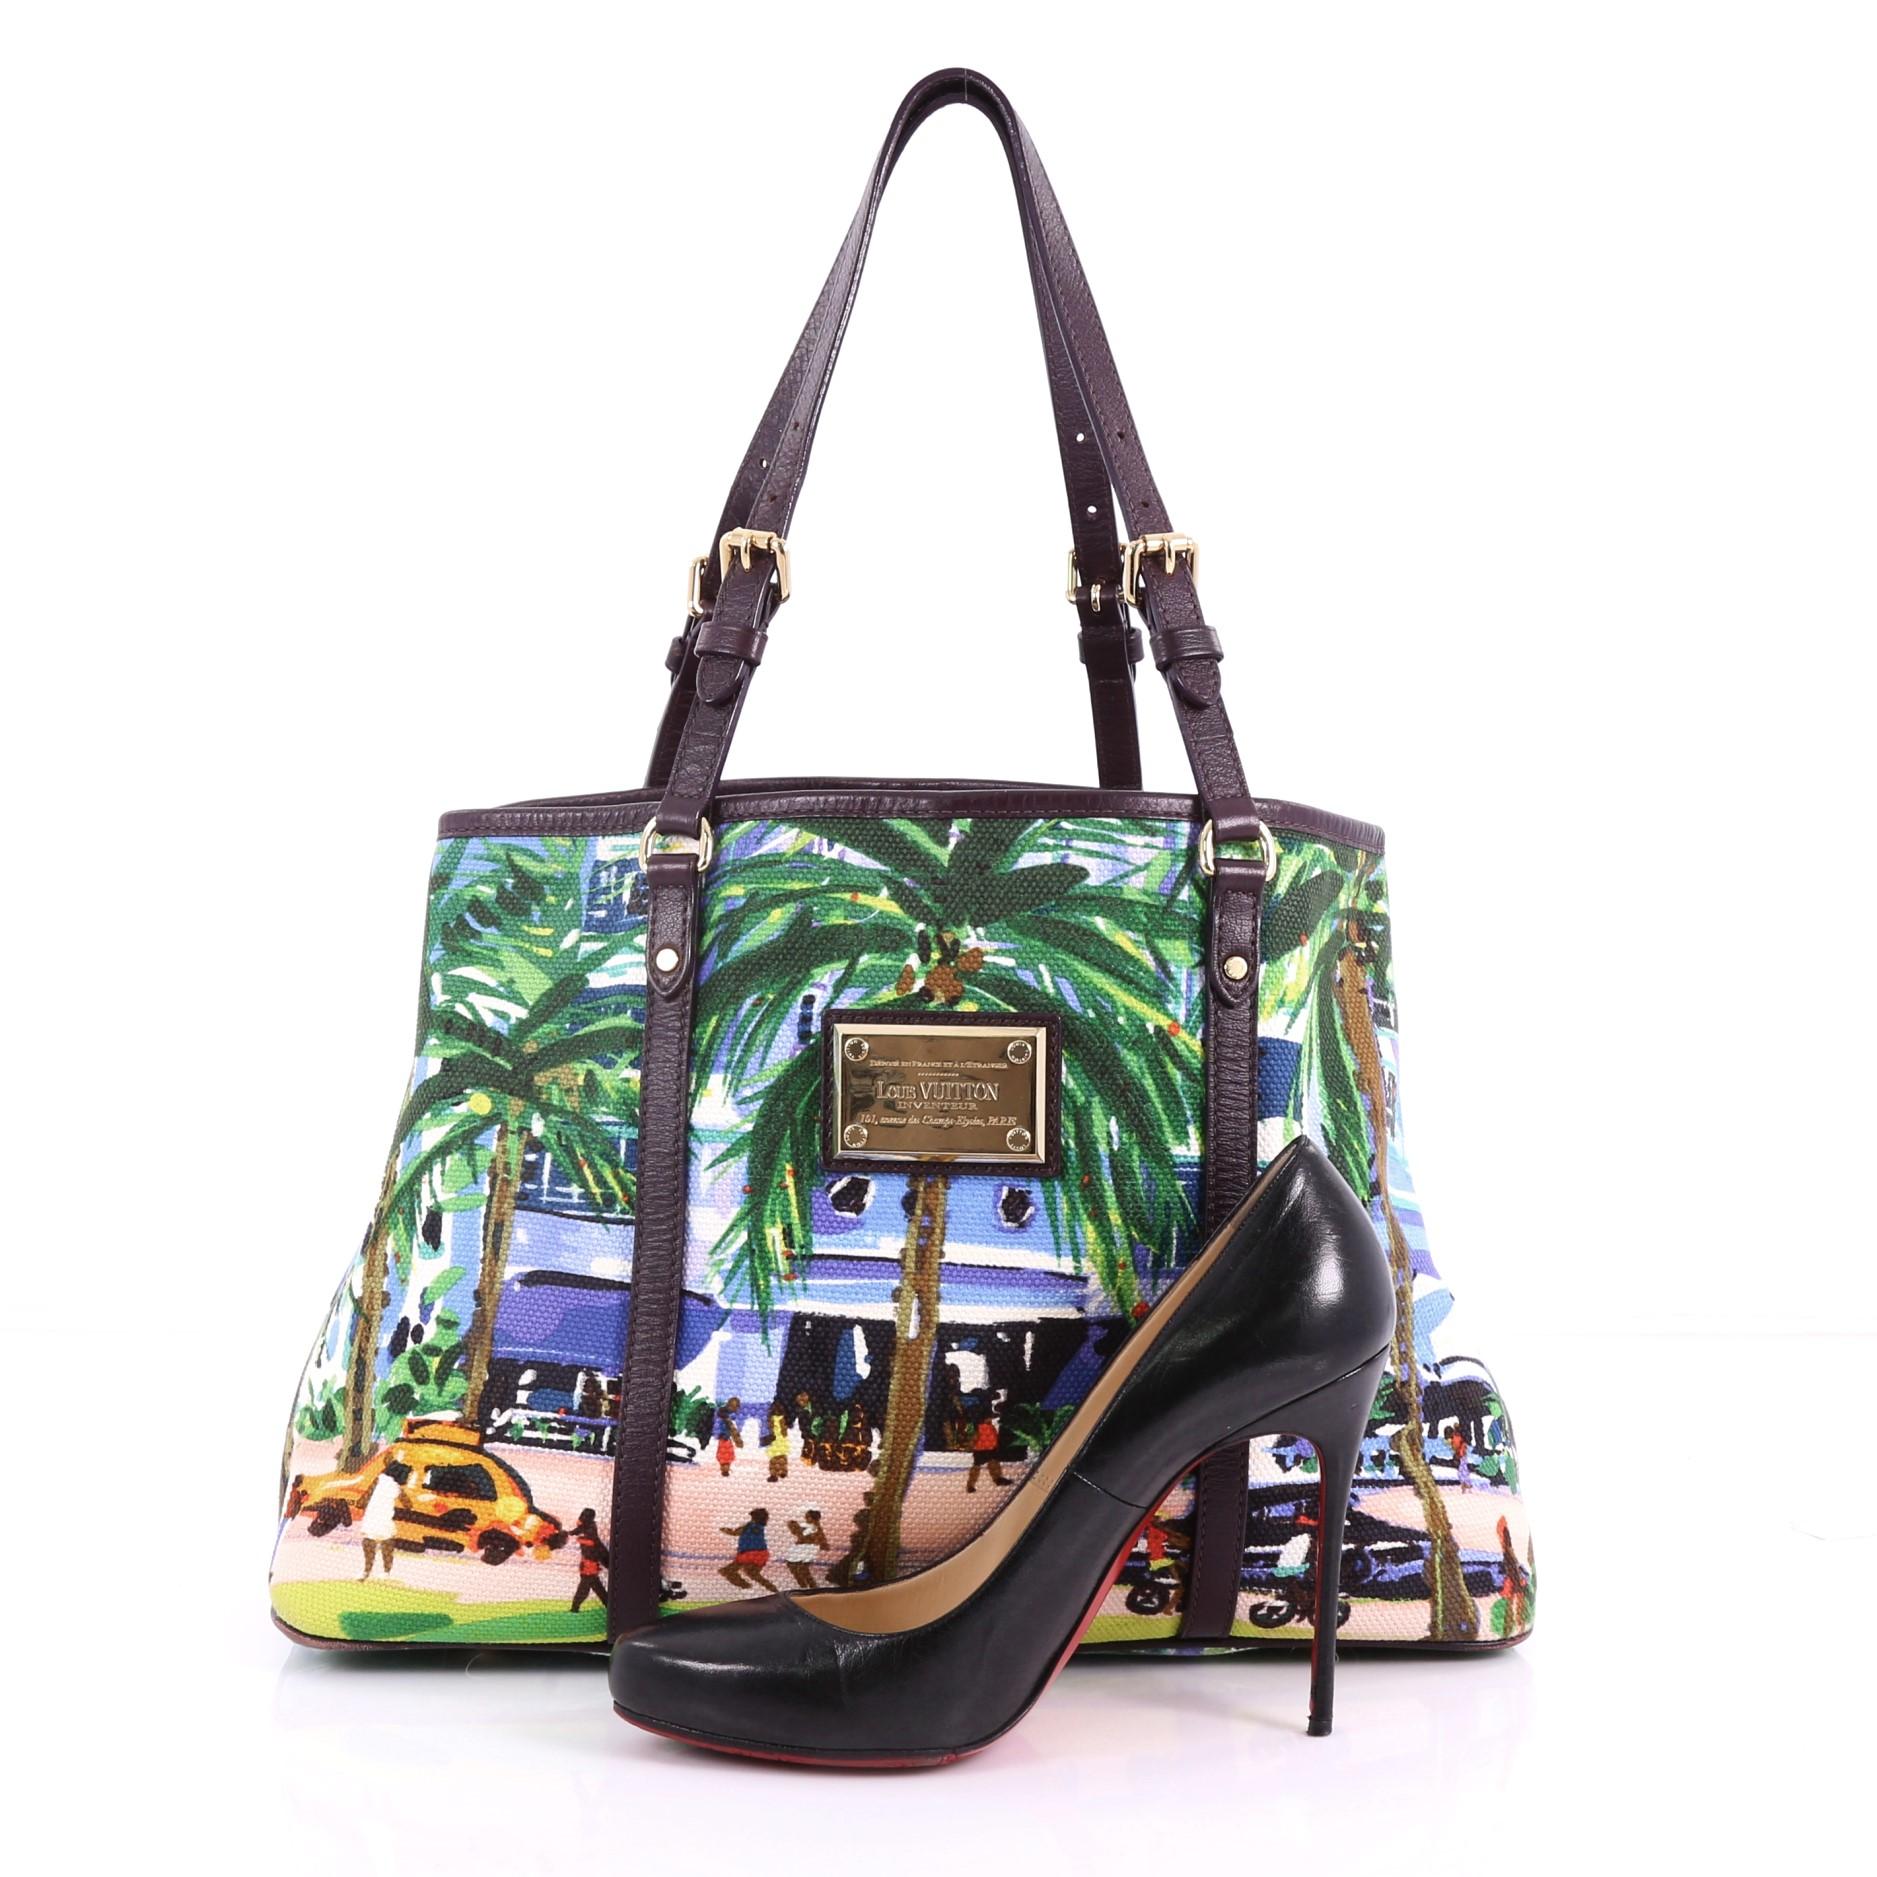 This Louis Vuitton Ailleurs Cabas Limited Edition Printed Canvas PM, crafted from multicolor printed canvas, features the Promenade painting of British artist Pippa Cunningham, dual adjustable flat leather handles, and gold-tone hardware. Its